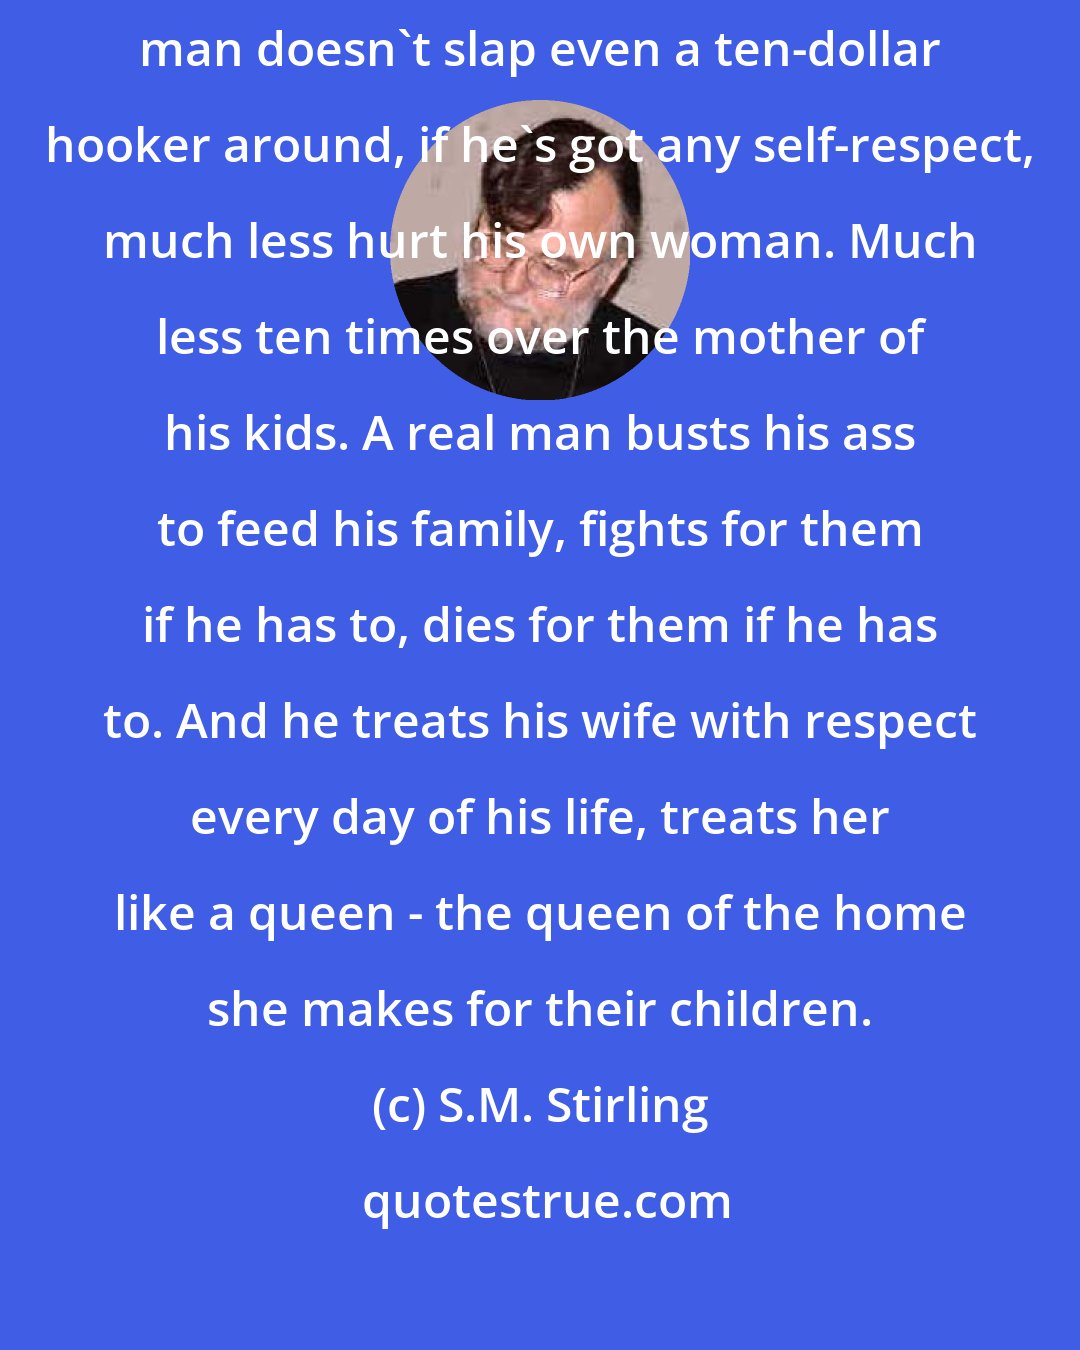 S.M. Stirling: Now let's move on to the subject of how a real man treats his wife. A real man doesn't slap even a ten-dollar hooker around, if he's got any self-respect, much less hurt his own woman. Much less ten times over the mother of his kids. A real man busts his ass to feed his family, fights for them if he has to, dies for them if he has to. And he treats his wife with respect every day of his life, treats her like a queen - the queen of the home she makes for their children.